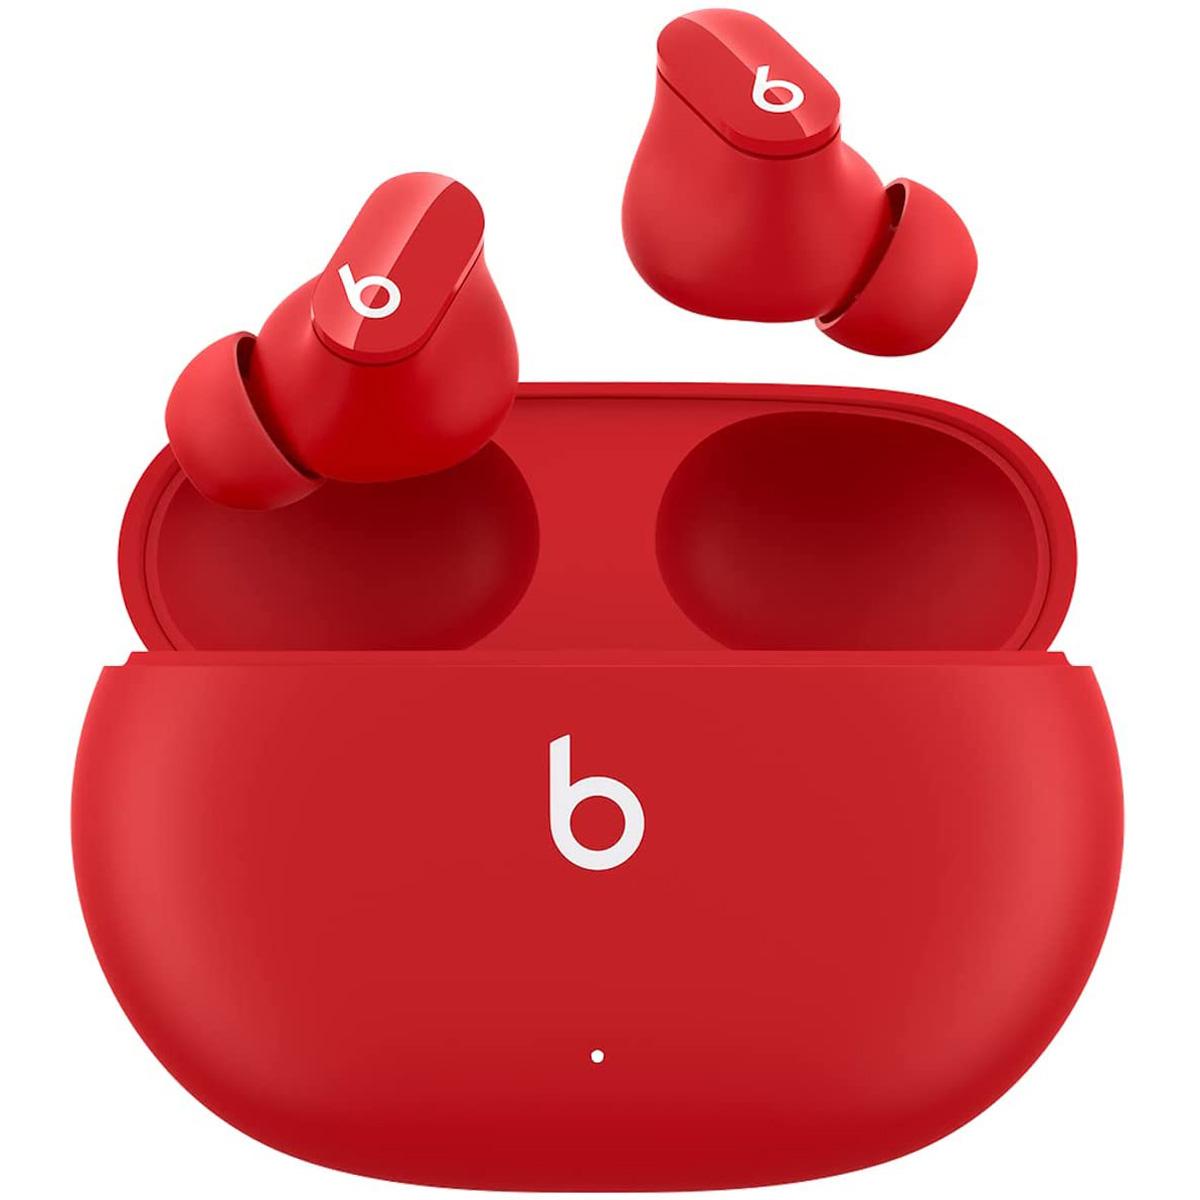 Beats Studio True Wireless Earbuds + $10 Gift Card for $99.95 Shipped